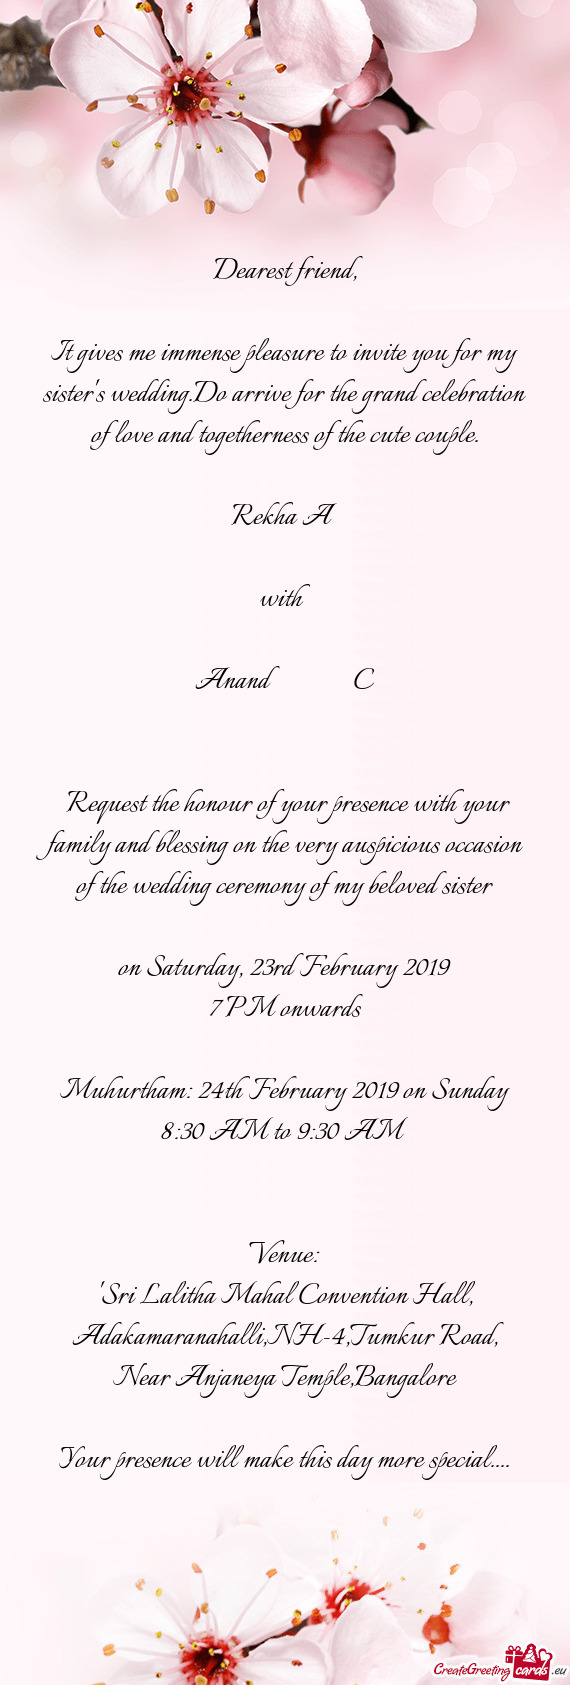 It gives me immense pleasure to invite you for my sister